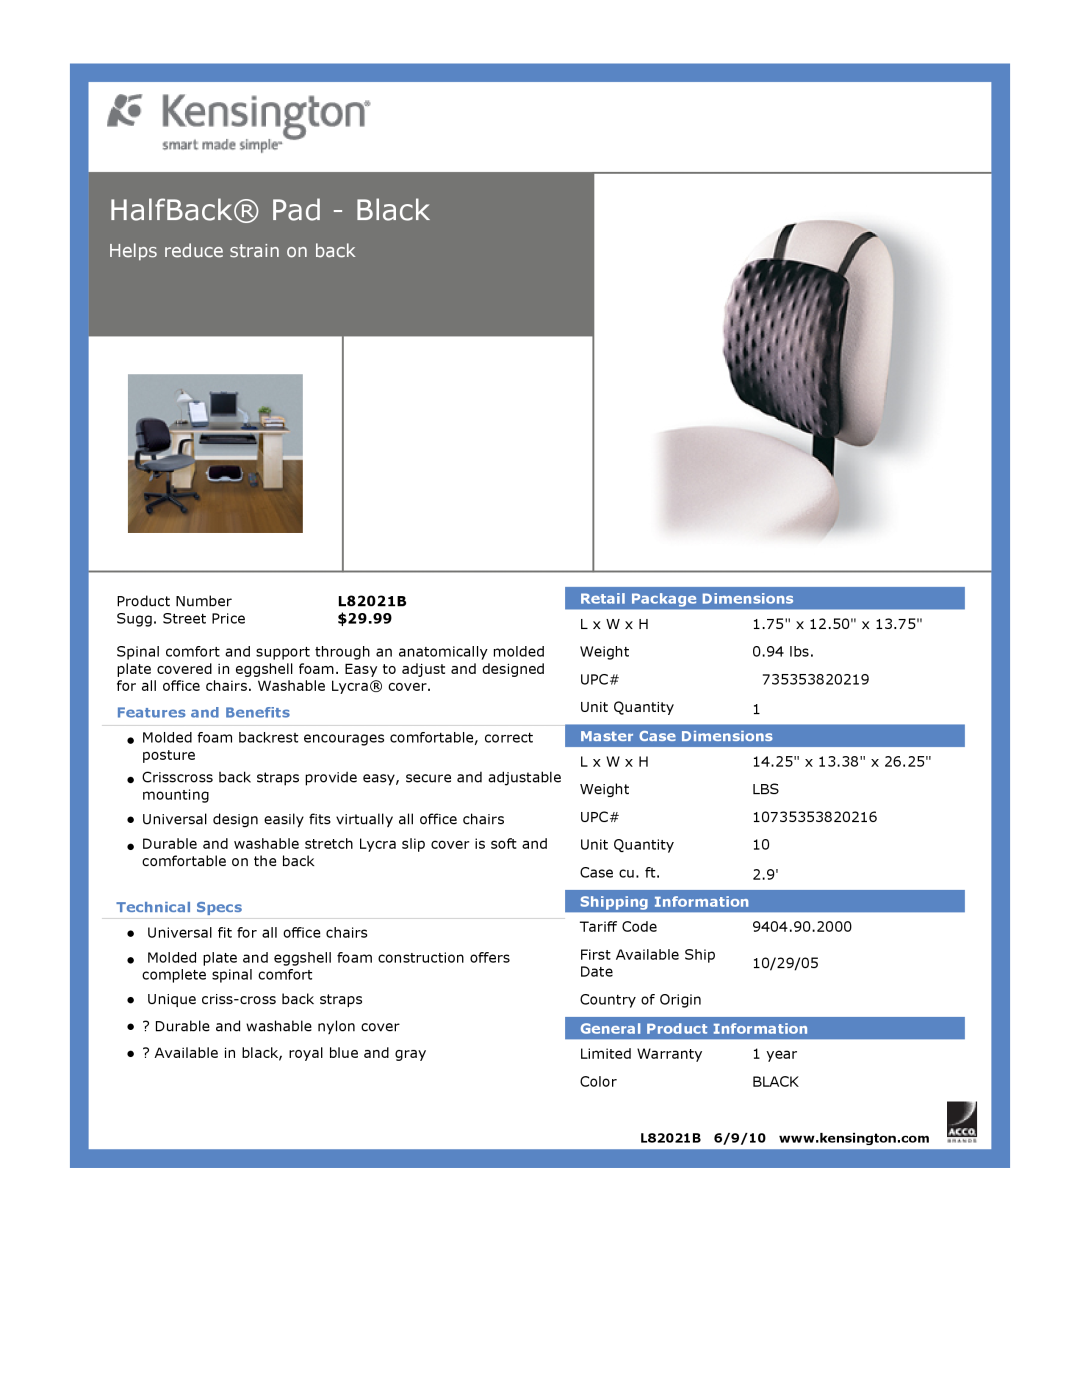 Kensington EU64325 HalfBack Pad - Black, Helps reduce strain on back, $29.99, Features and Benefits, Technical Specs 